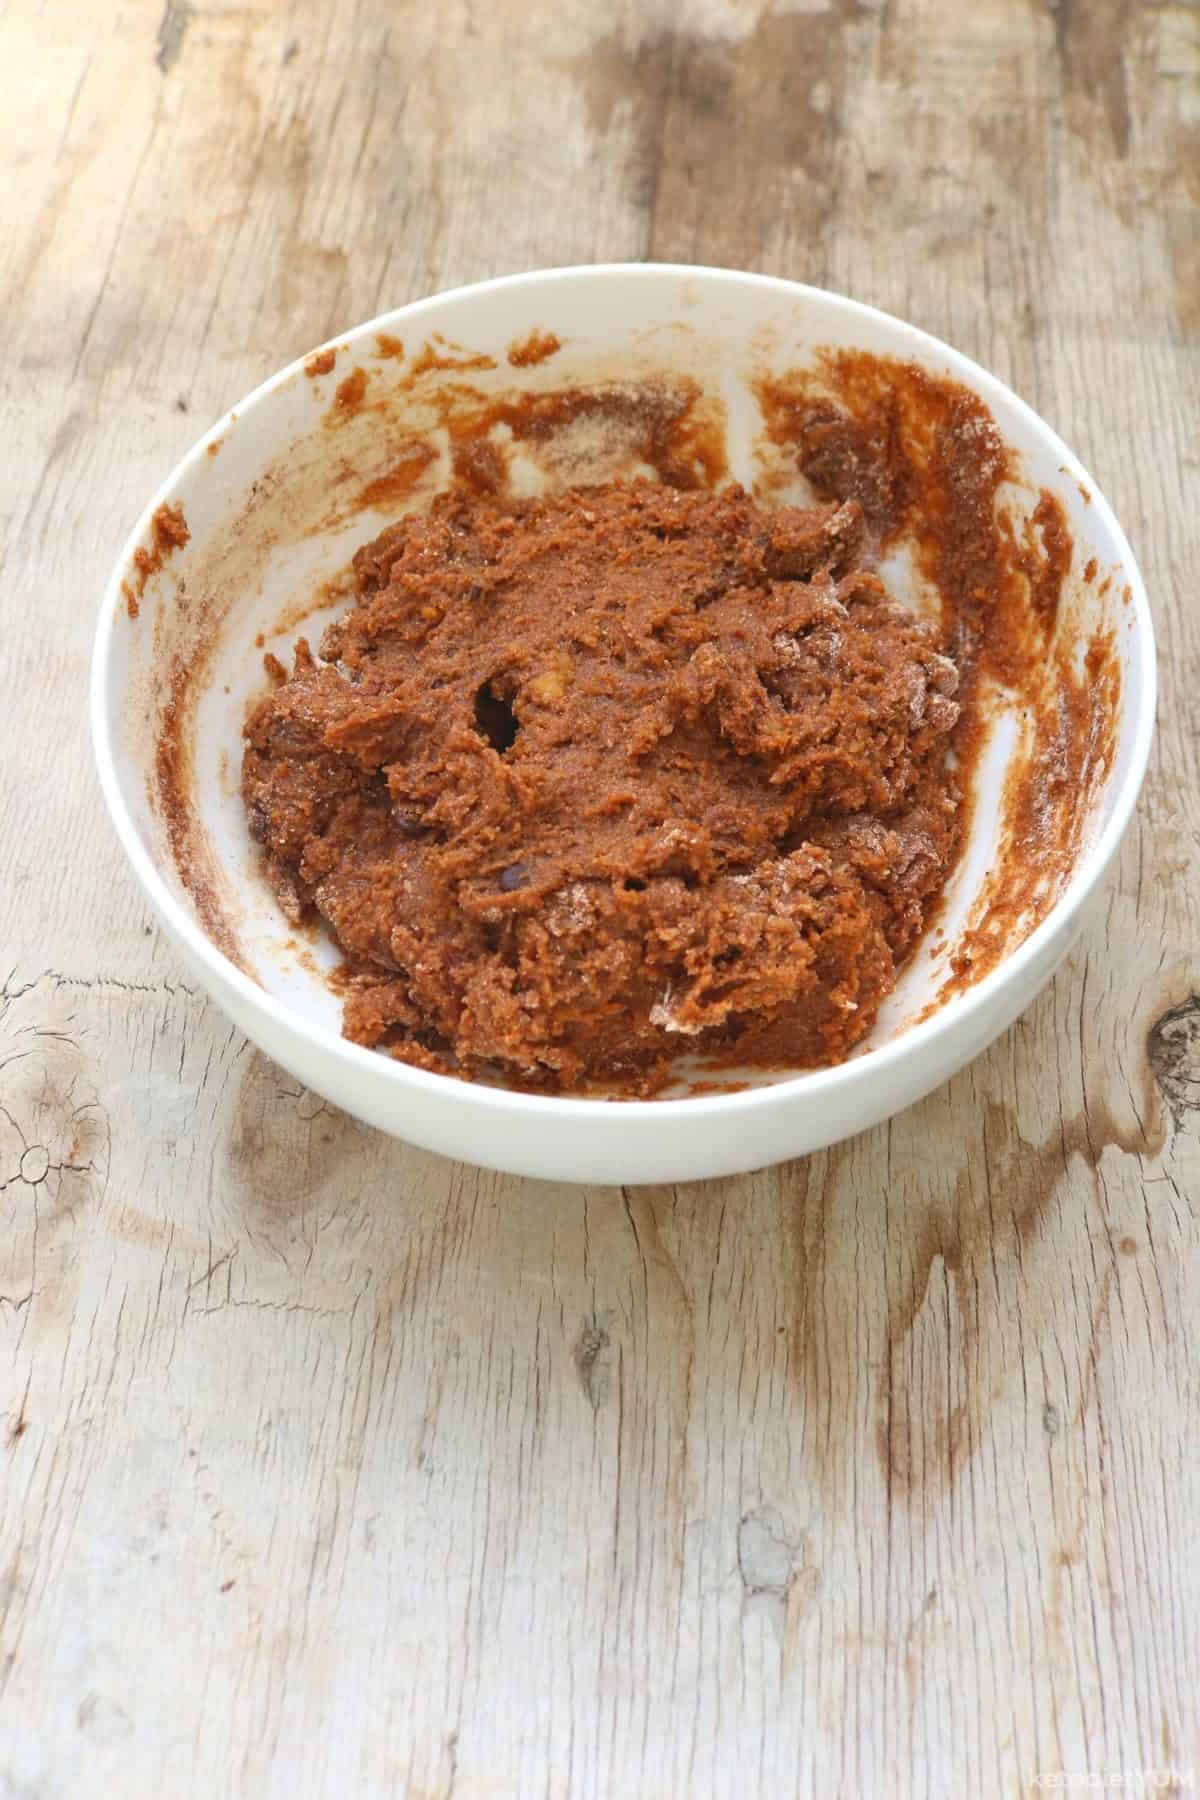 Mixing ingredients in a bowl into a cookie batter